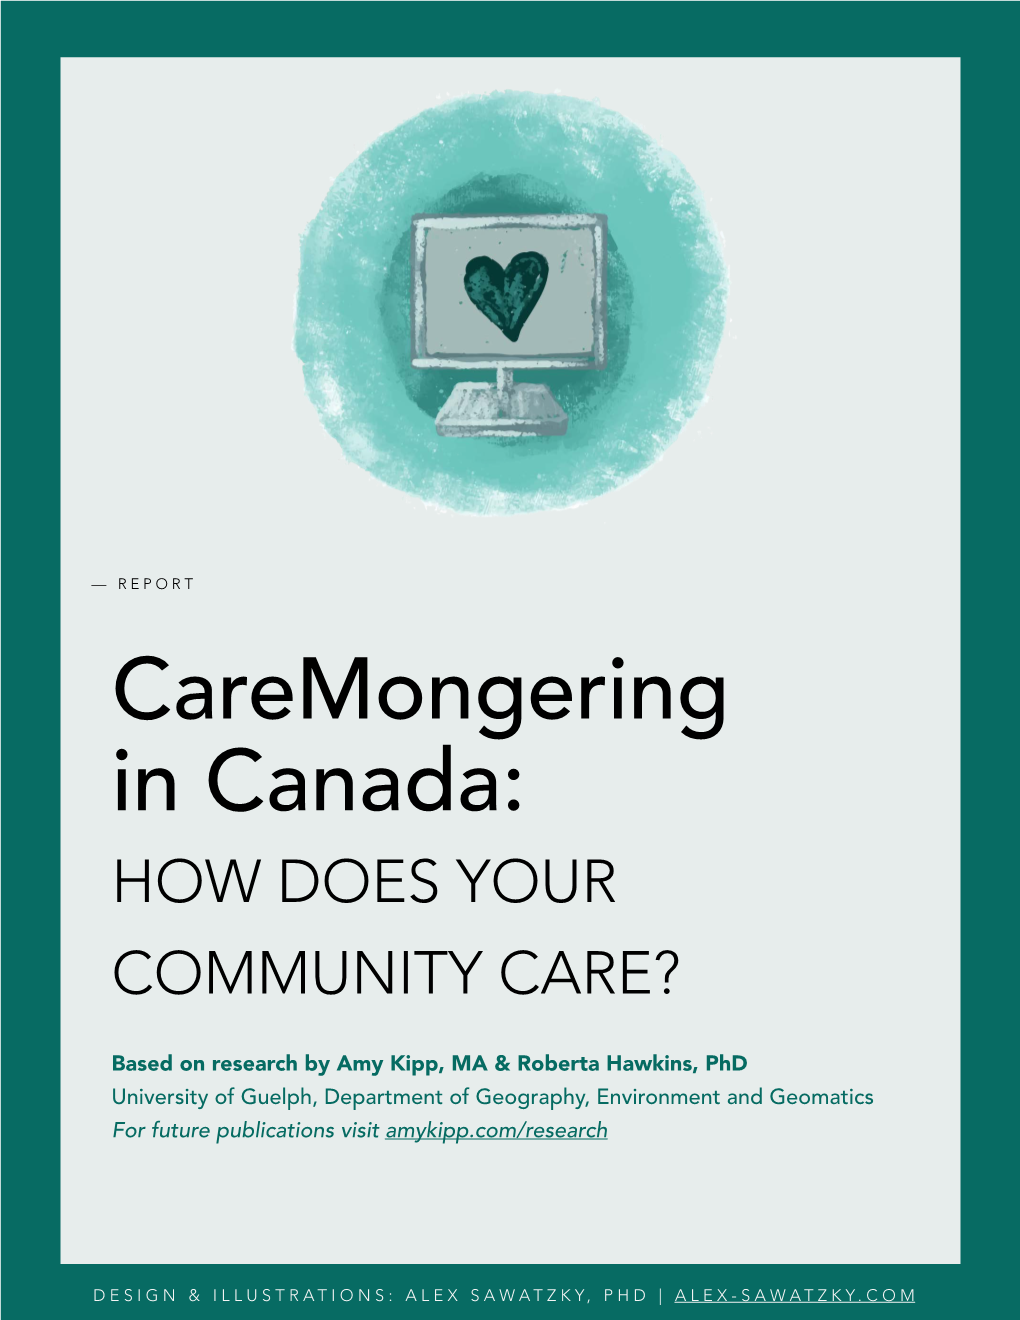 Caremongering in Canada: HOW DOES YOUR COMMUNITY CARE?